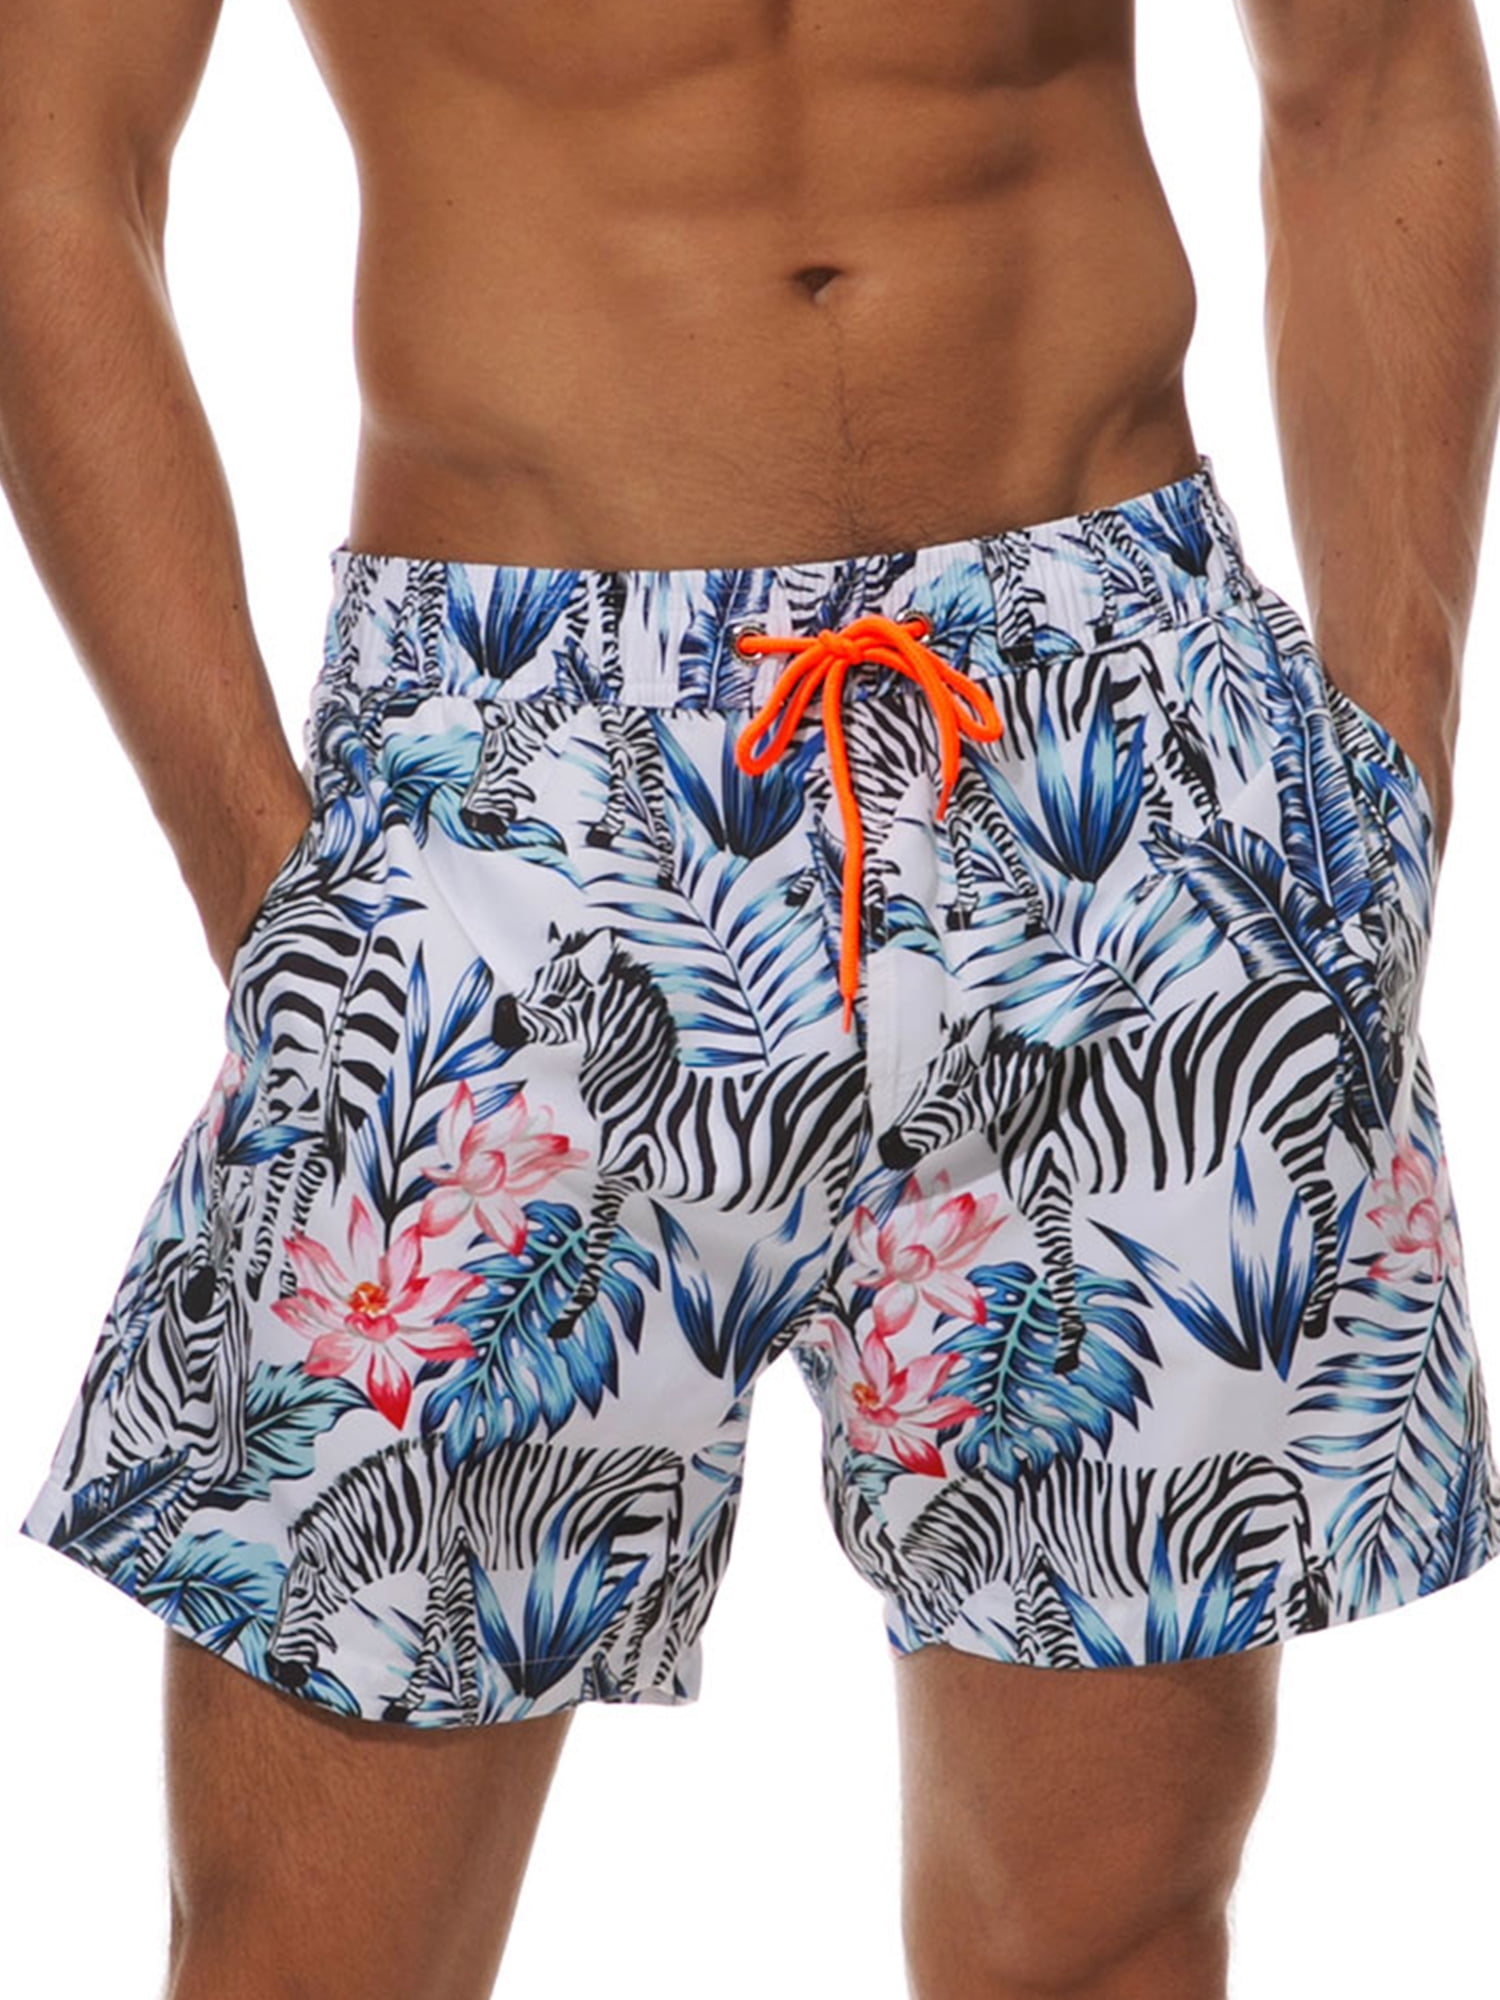 New Boys Mens Swimming Trunks Swim Shorts Board Shorts With